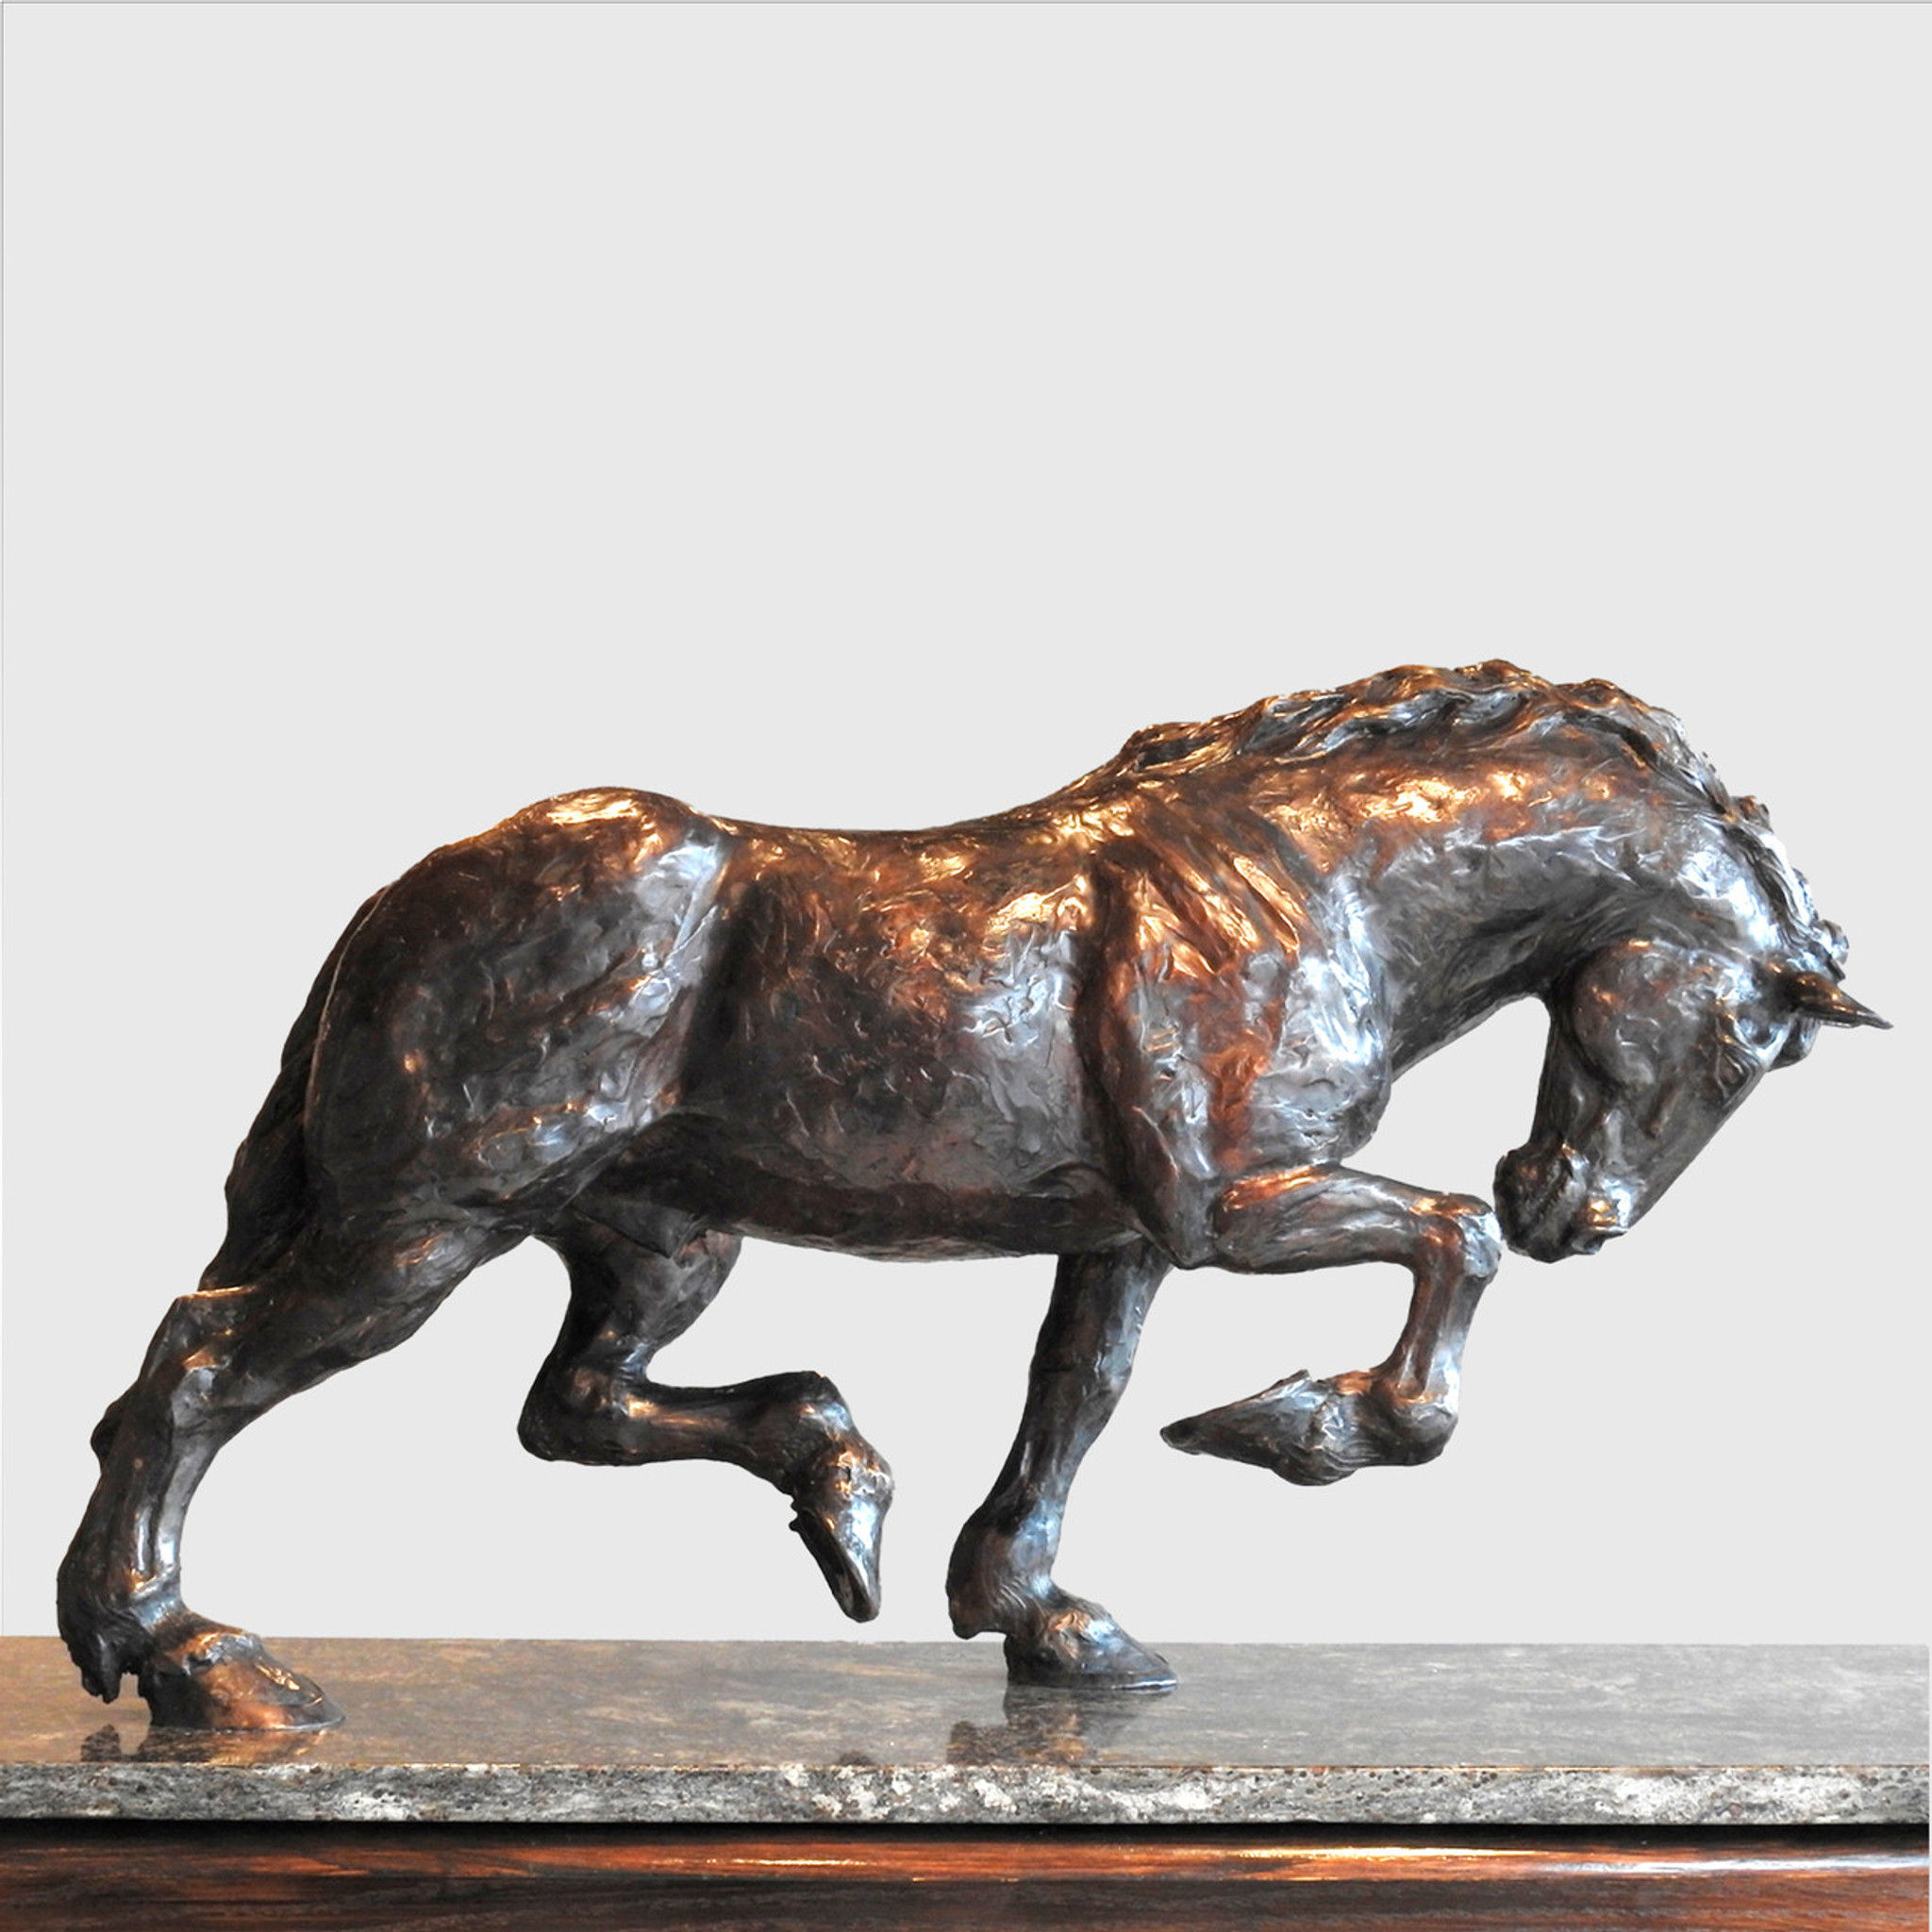 Unbridled, 30", Bronze Horse by Kindrie Grove of Canada, Handmade Bronze Sculpture | available in the elk & HAMMER Gallery of Bozeman, Montana; curated by Ashley Childs, artist, maker, owner and creative director of elk & HAMMER.